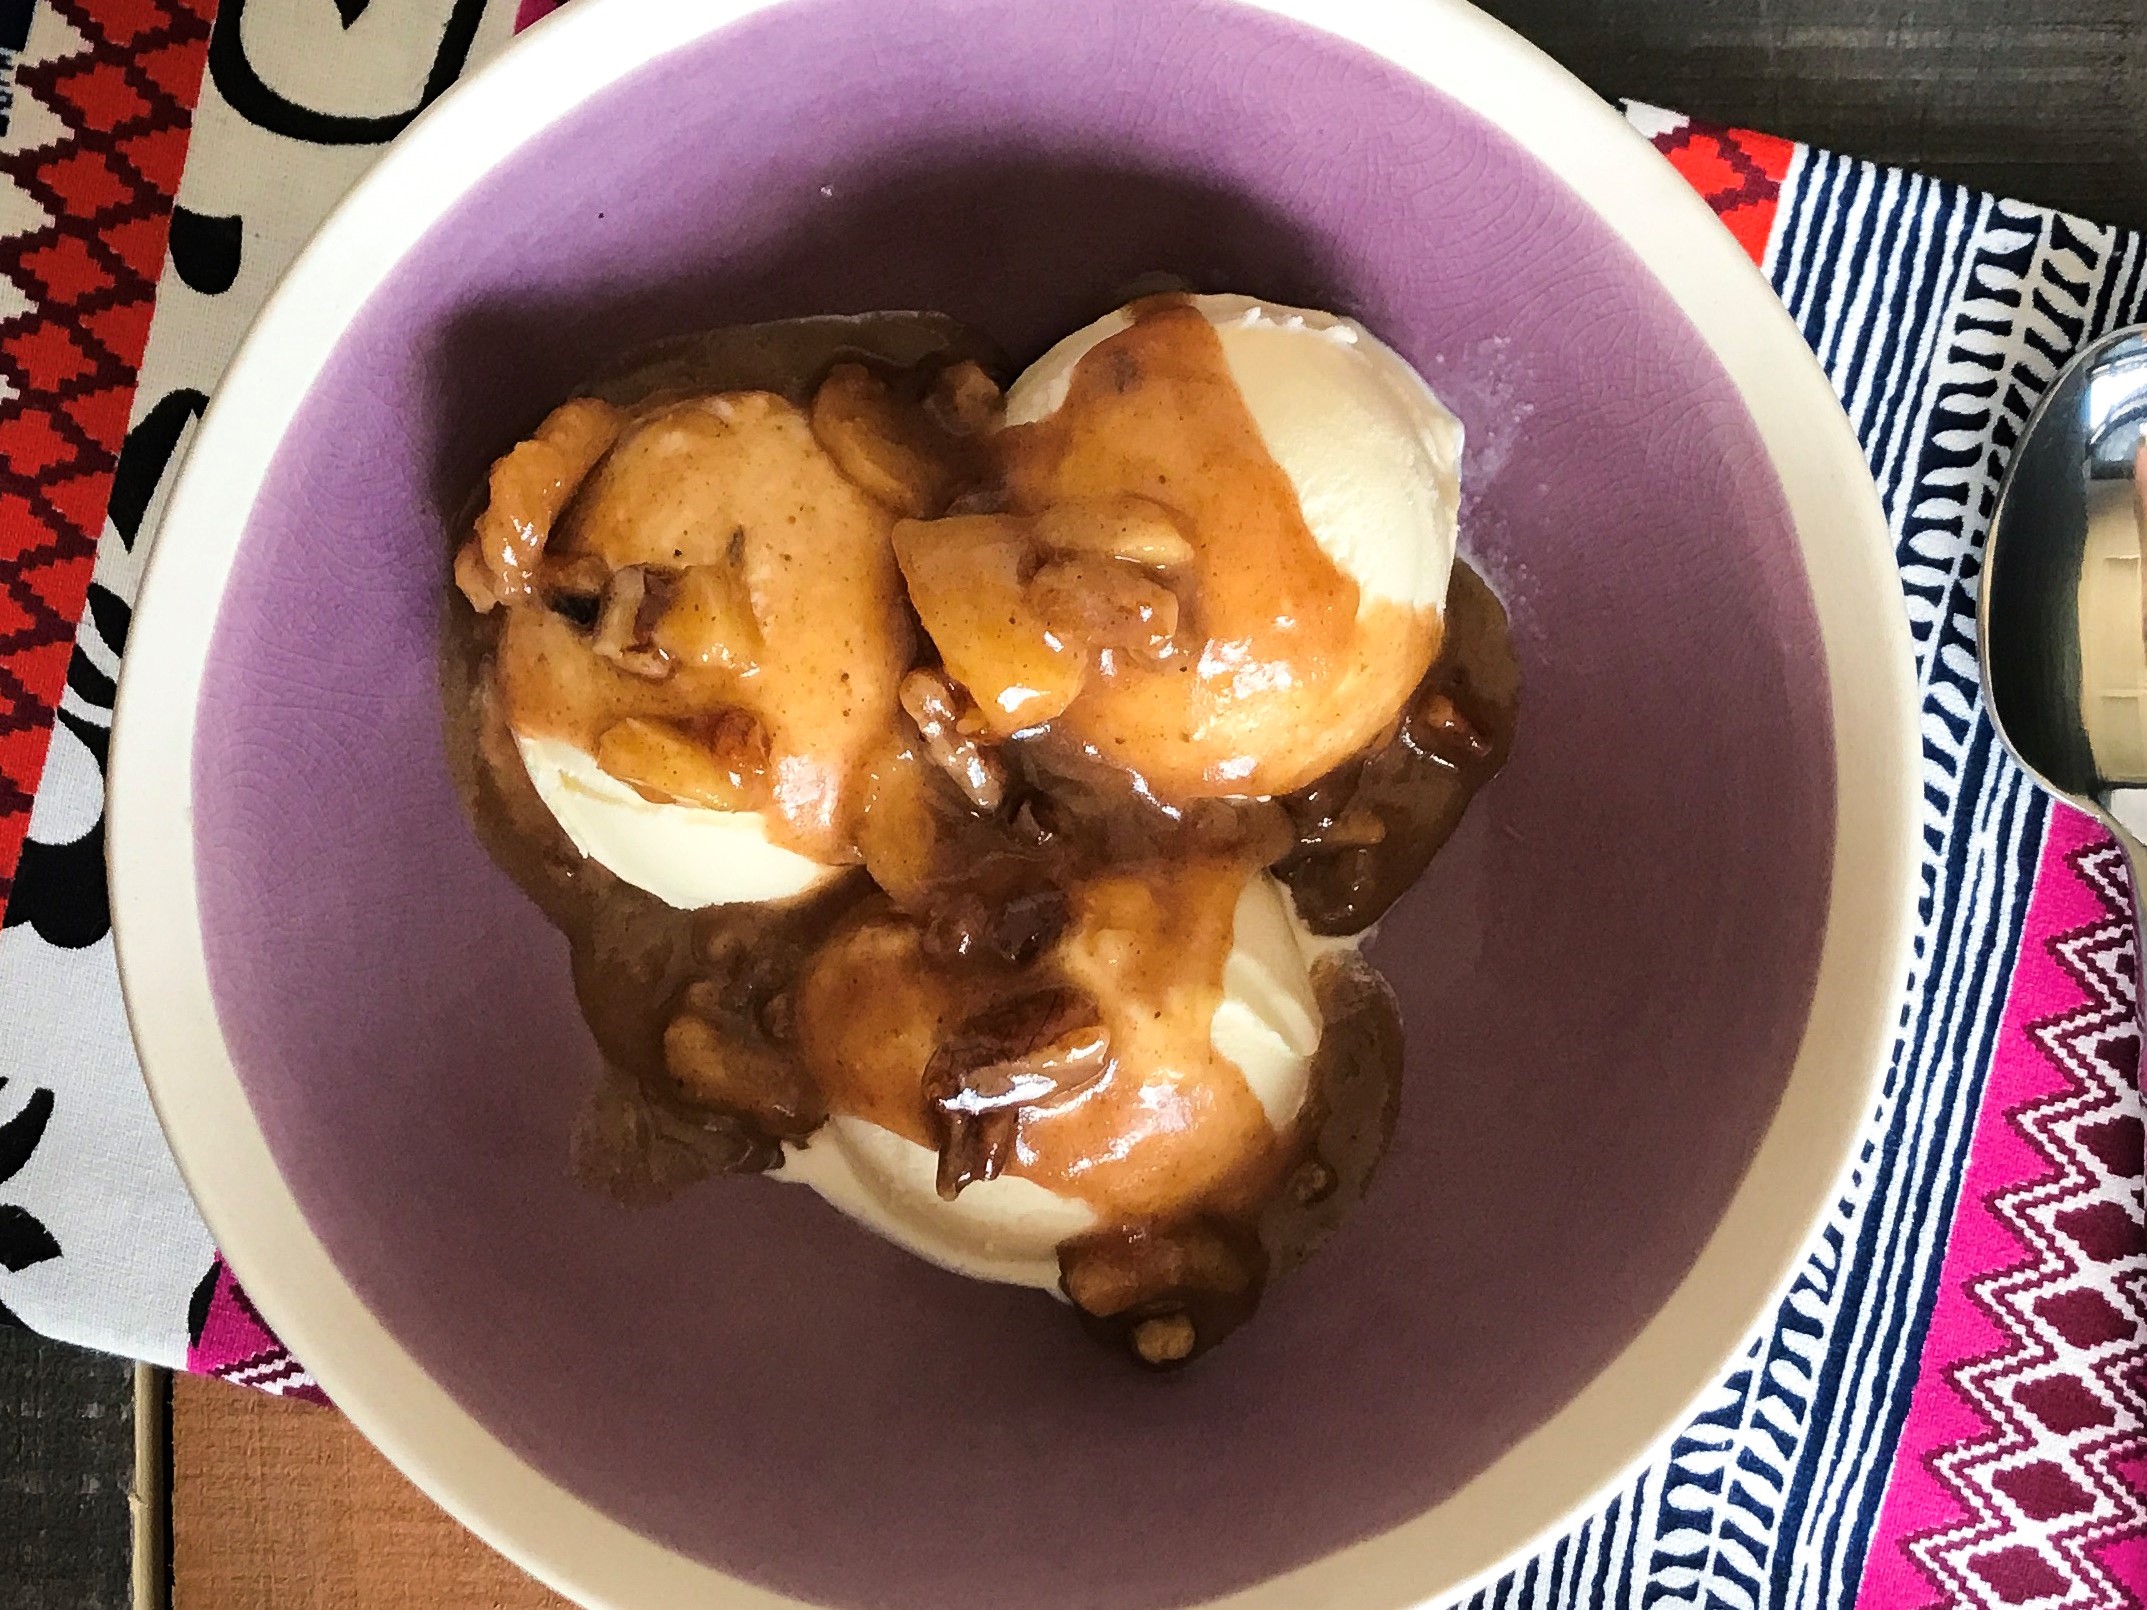 a bowl of banana bliss with 3 scoops of ice cream topped with a glaze